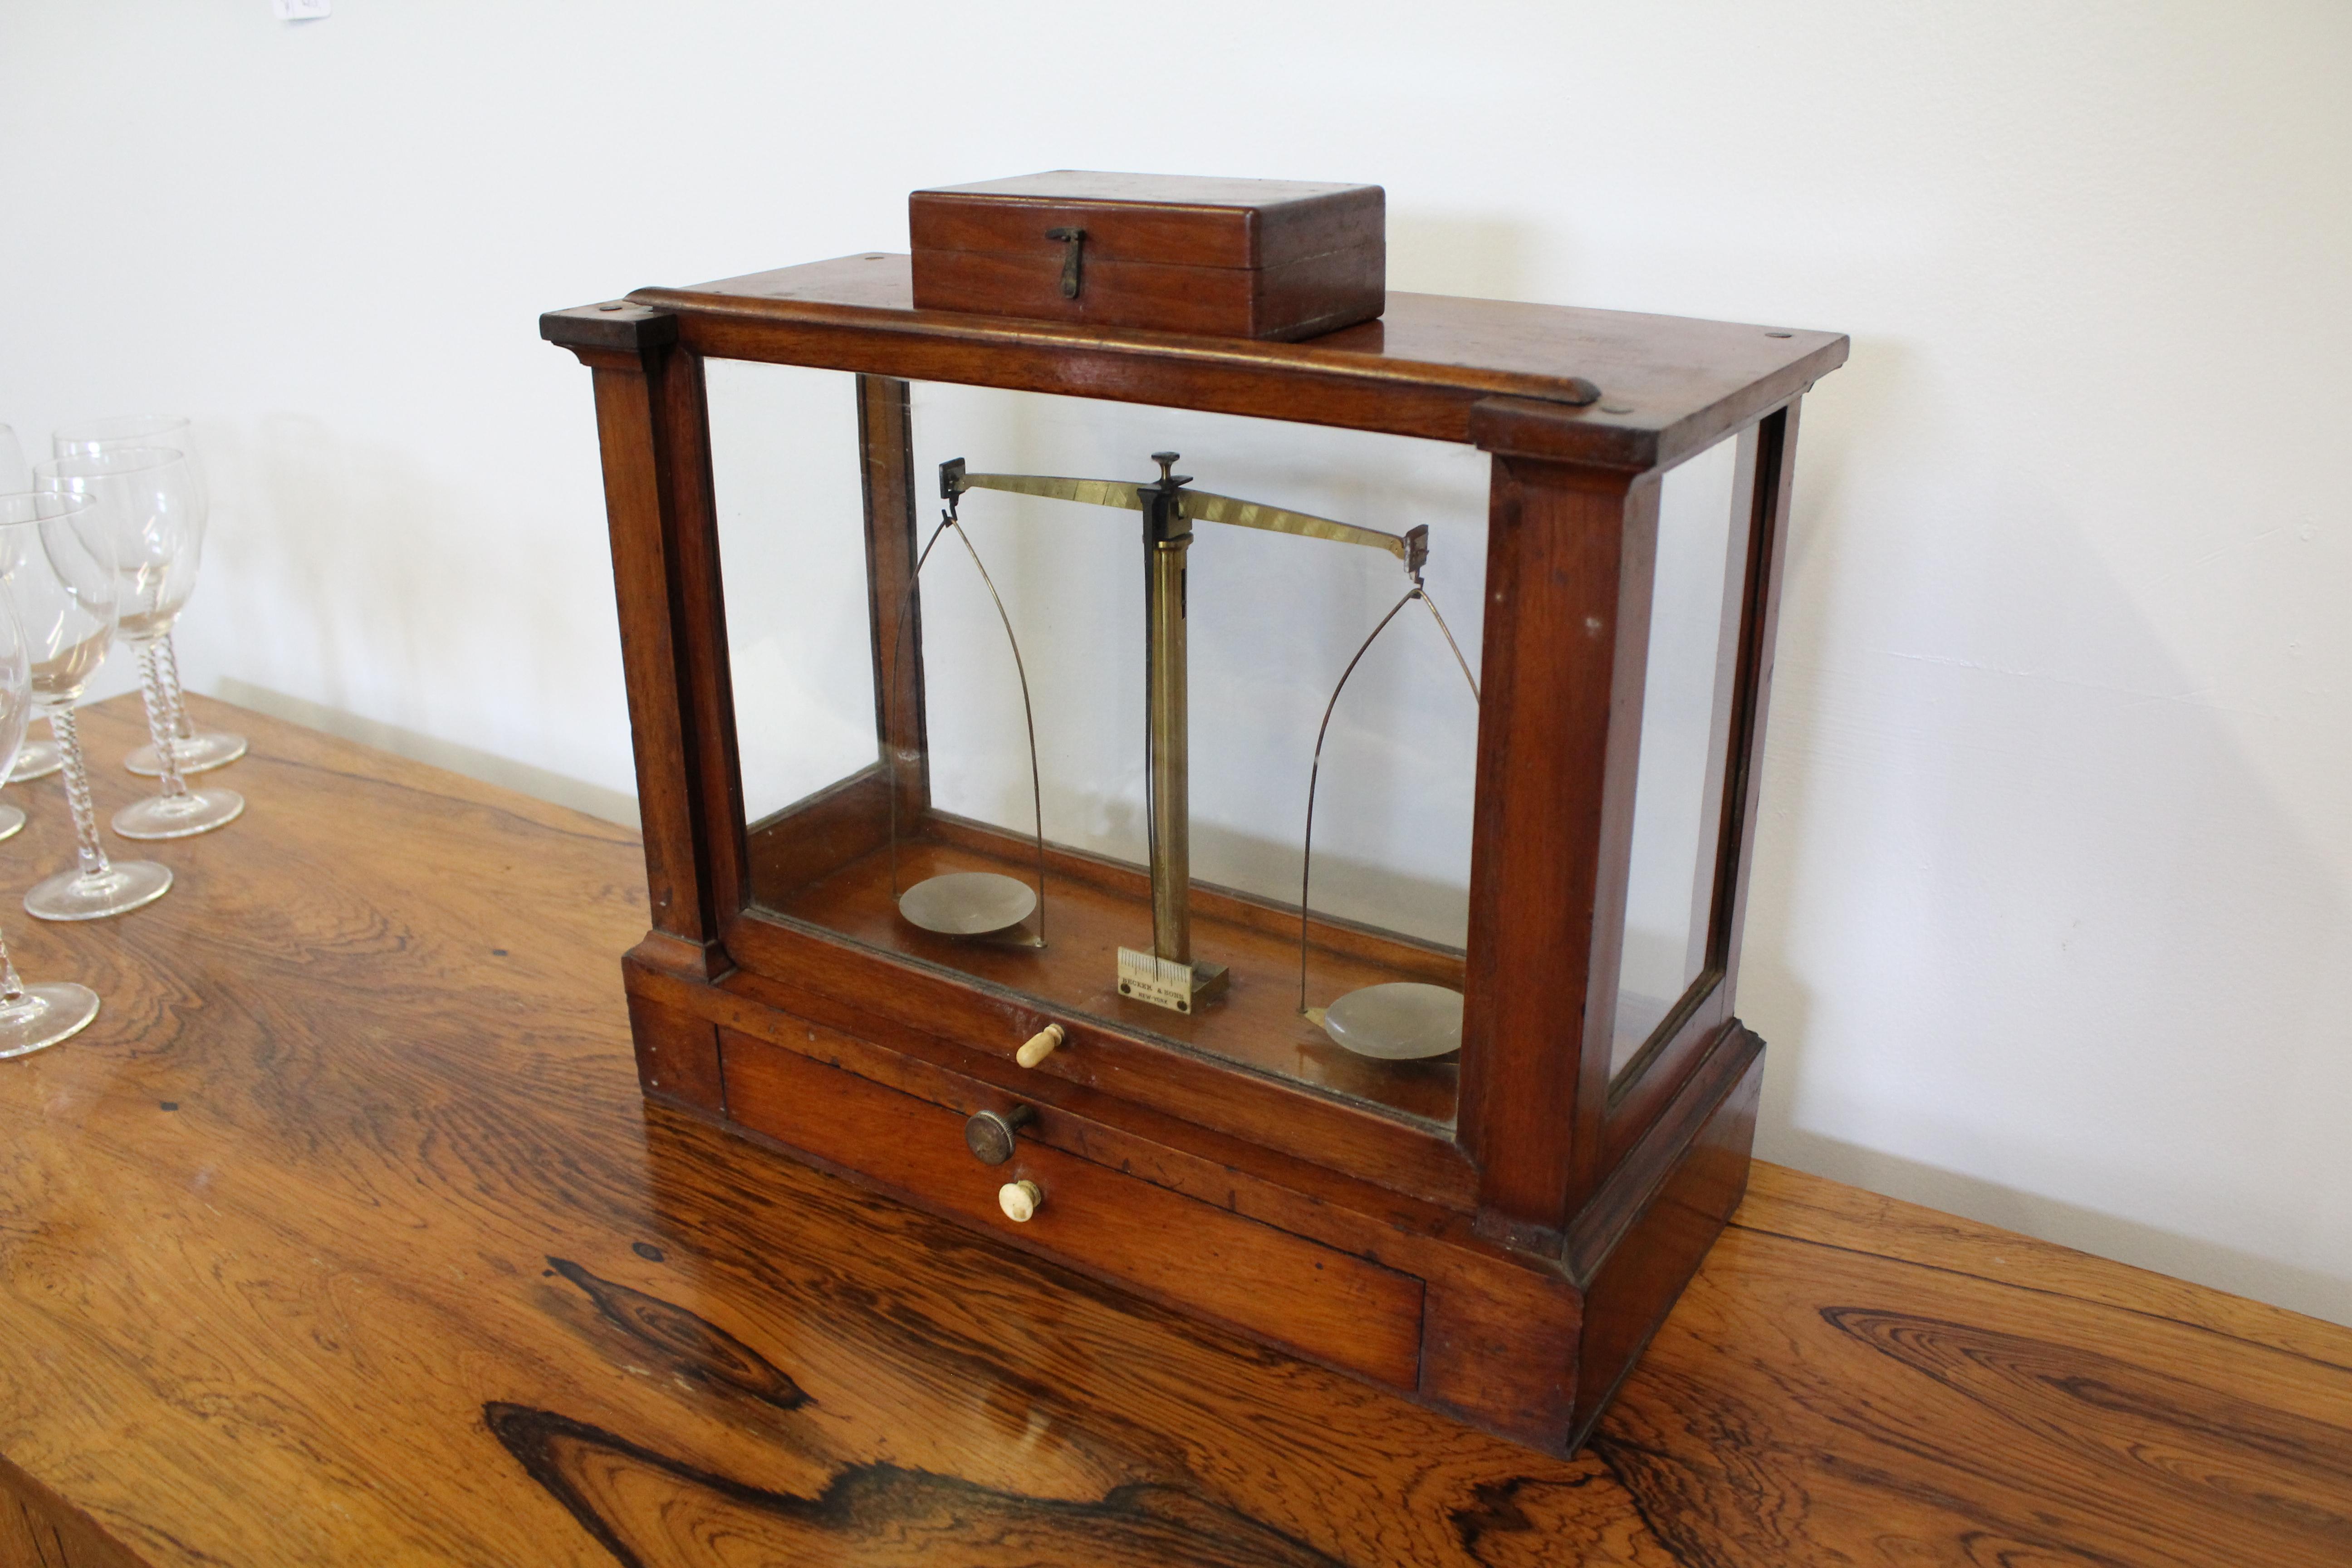 Offered is a rare, antique apothecary scale made by Becker & Sons of New York, circa 1903. The scale is housed inside a glass case with a mahogany frame and pull out drawer. There is a glass unit with sliding window on front side as well as the back